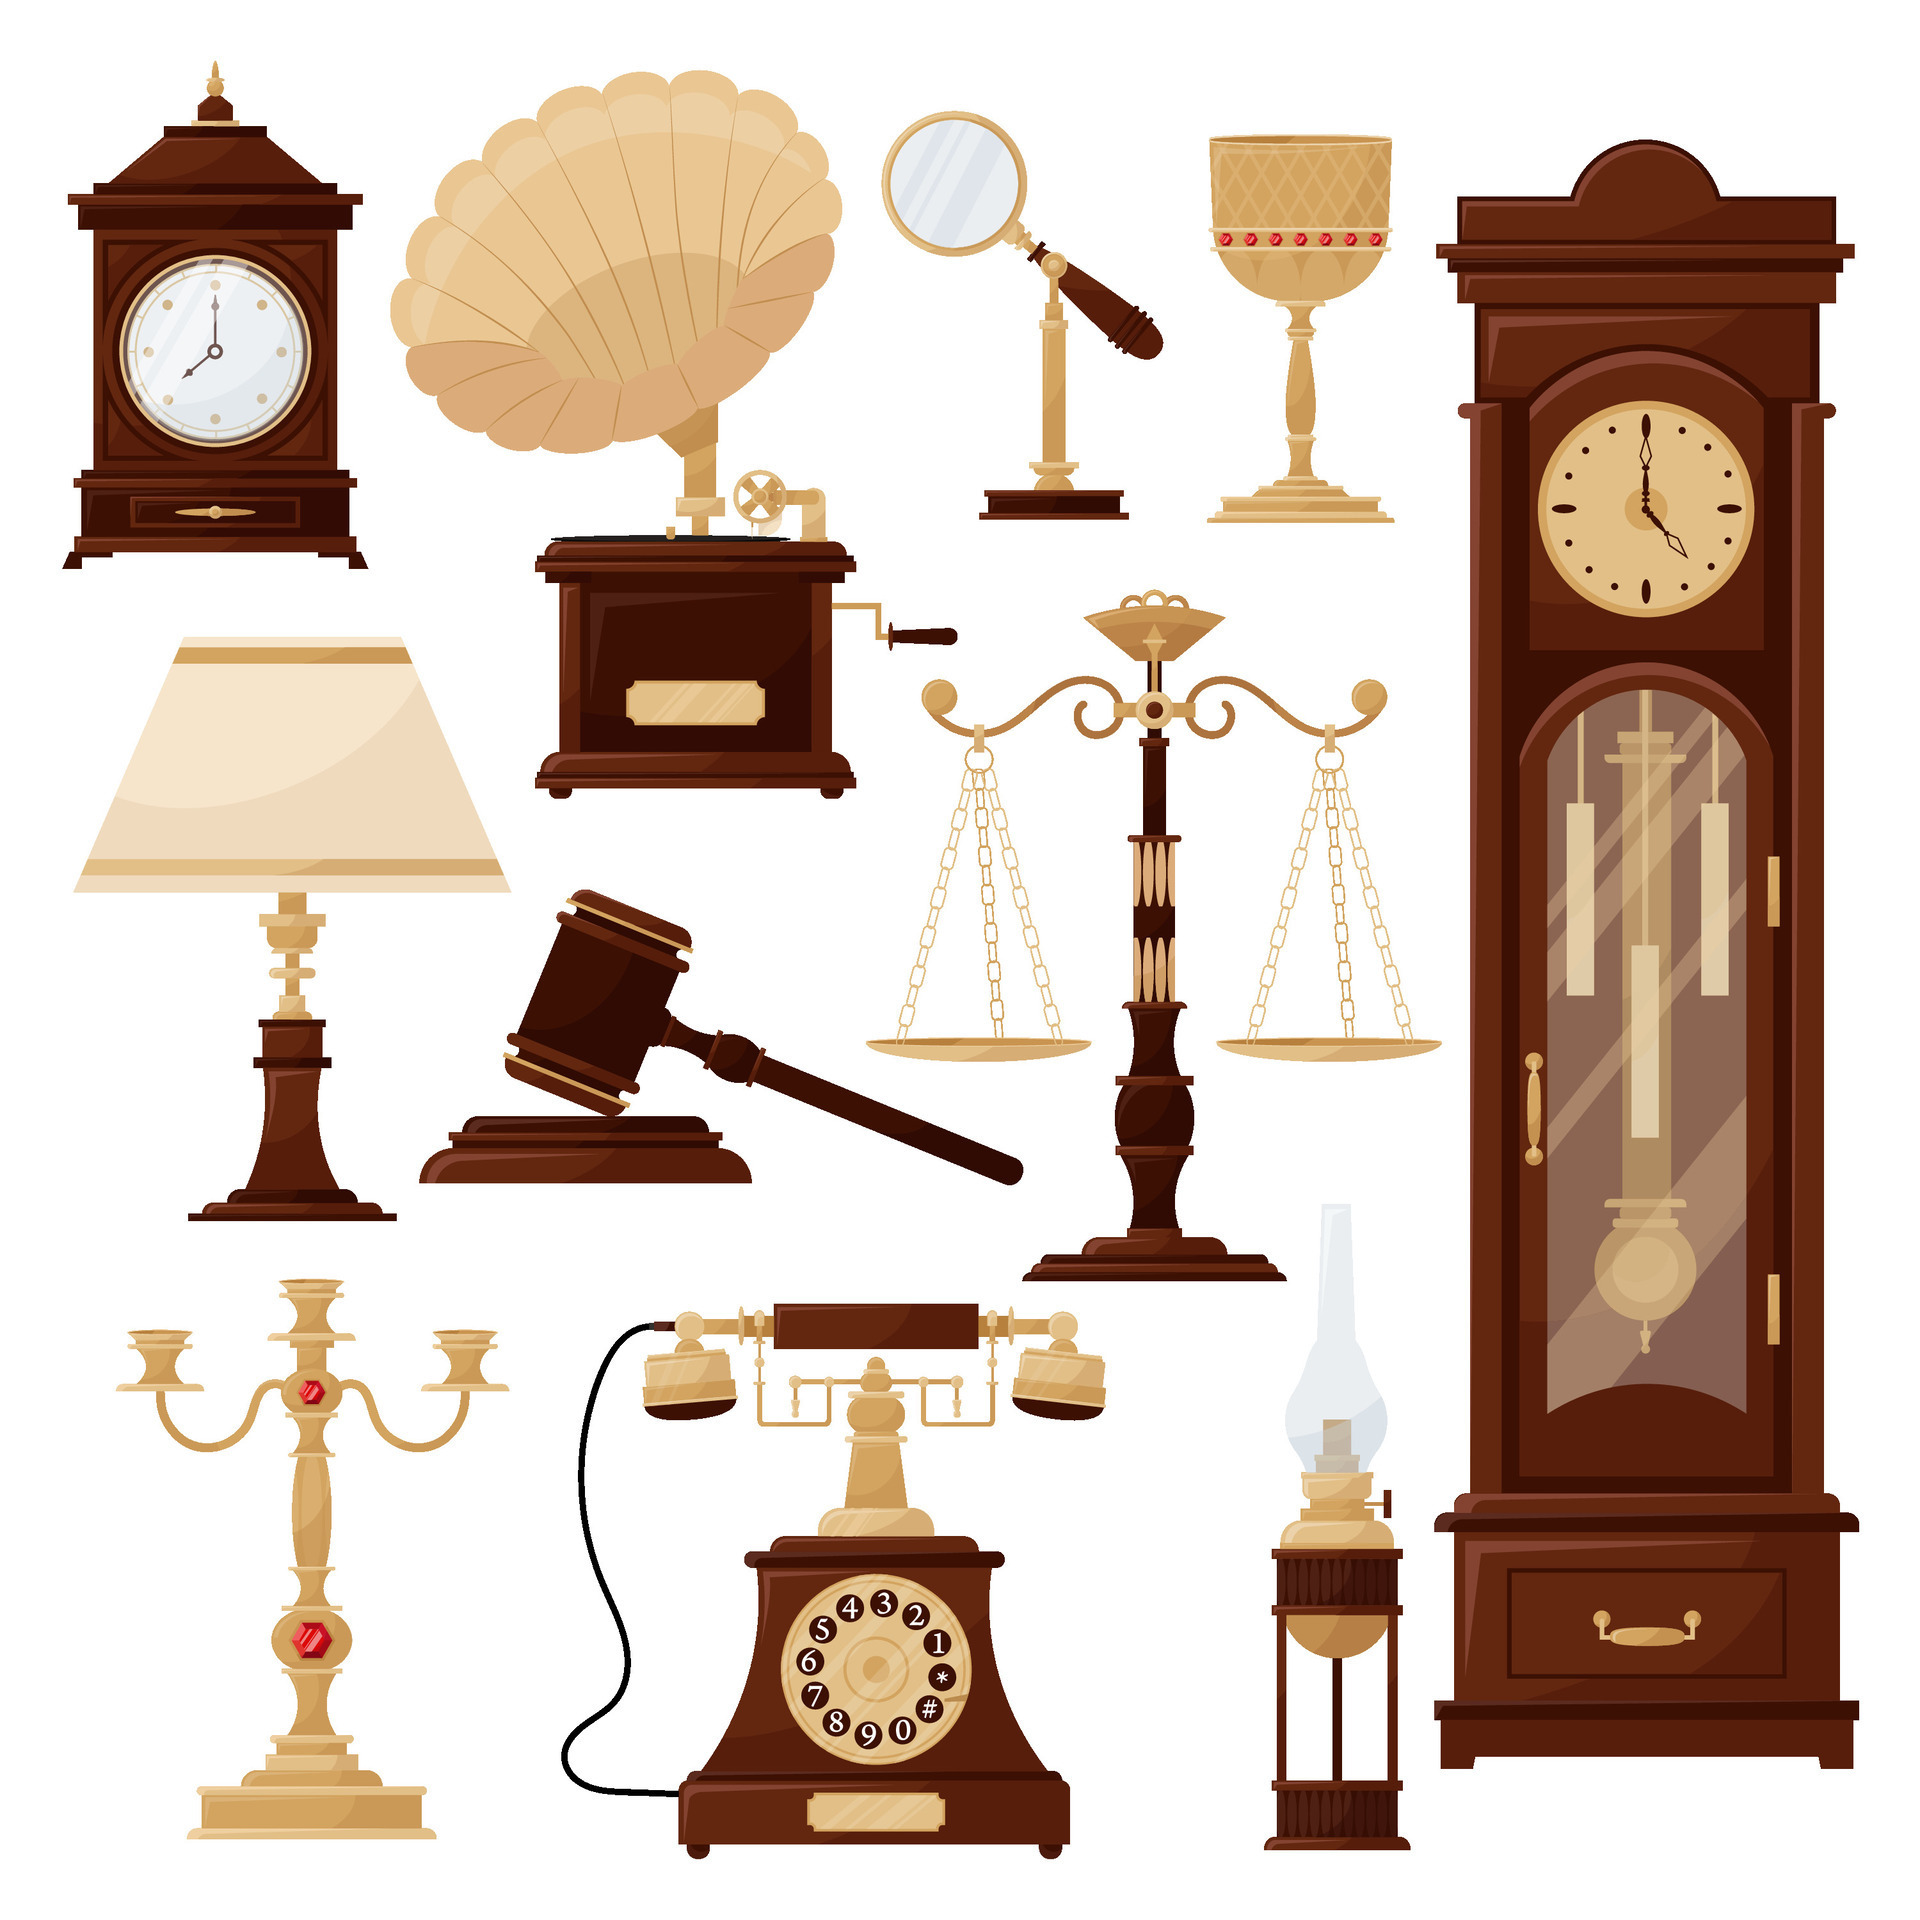 https://static.vecteezy.com/system/resources/previews/026/969/441/original/antiques-old-things-vintage-set-of-illustrations-of-antique-items-vector.jpg